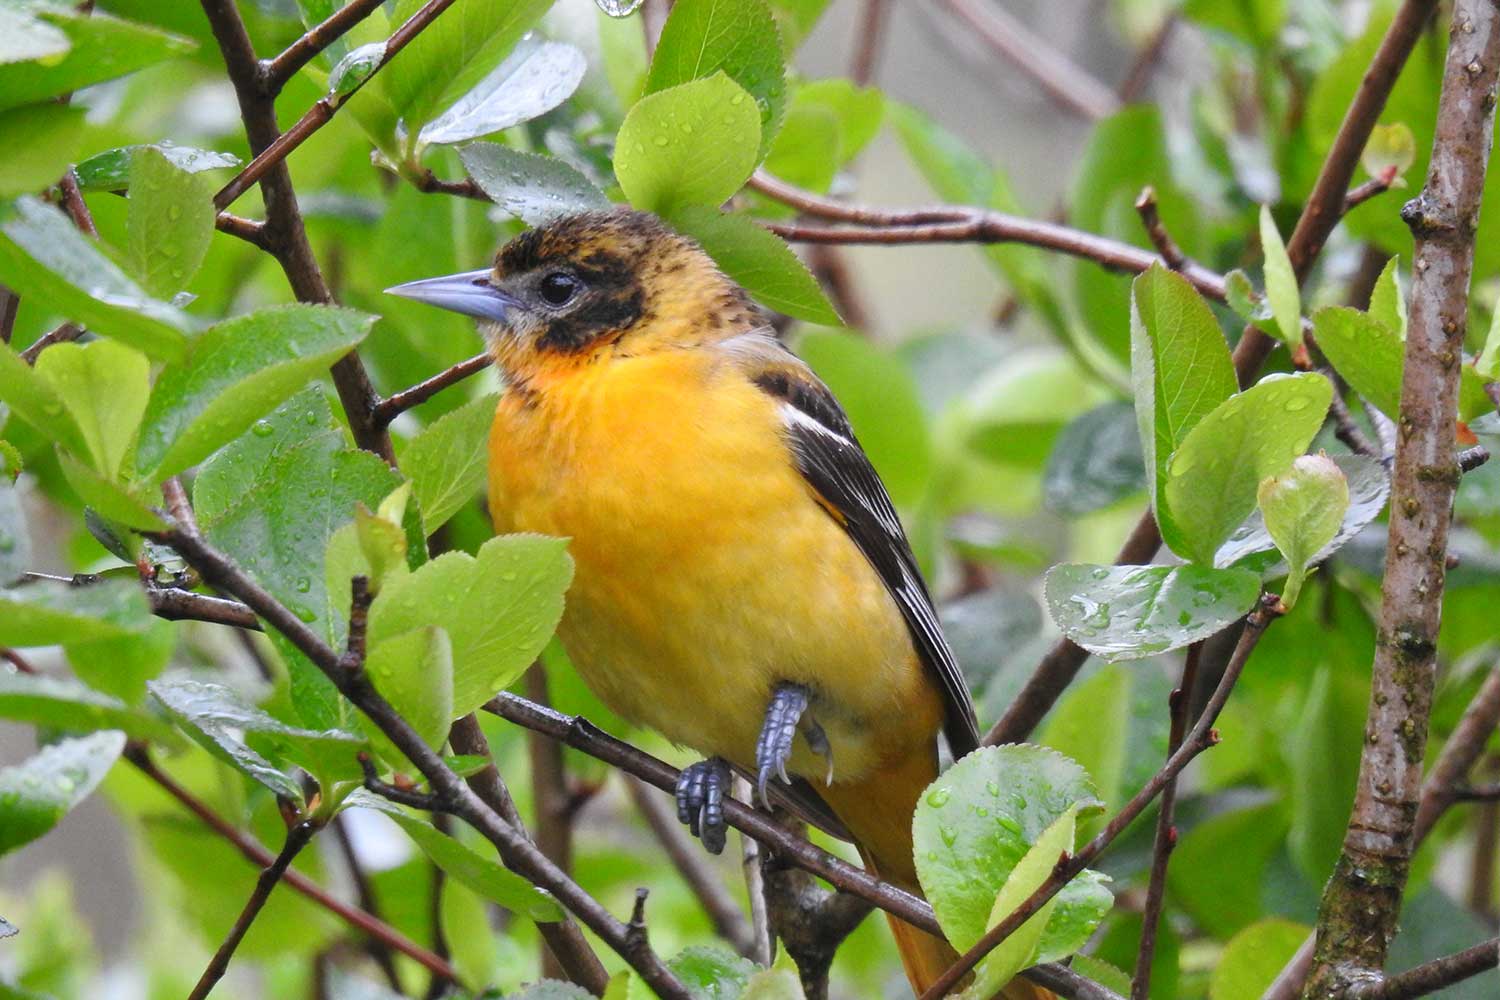 A Baltimore oriole in a tree.